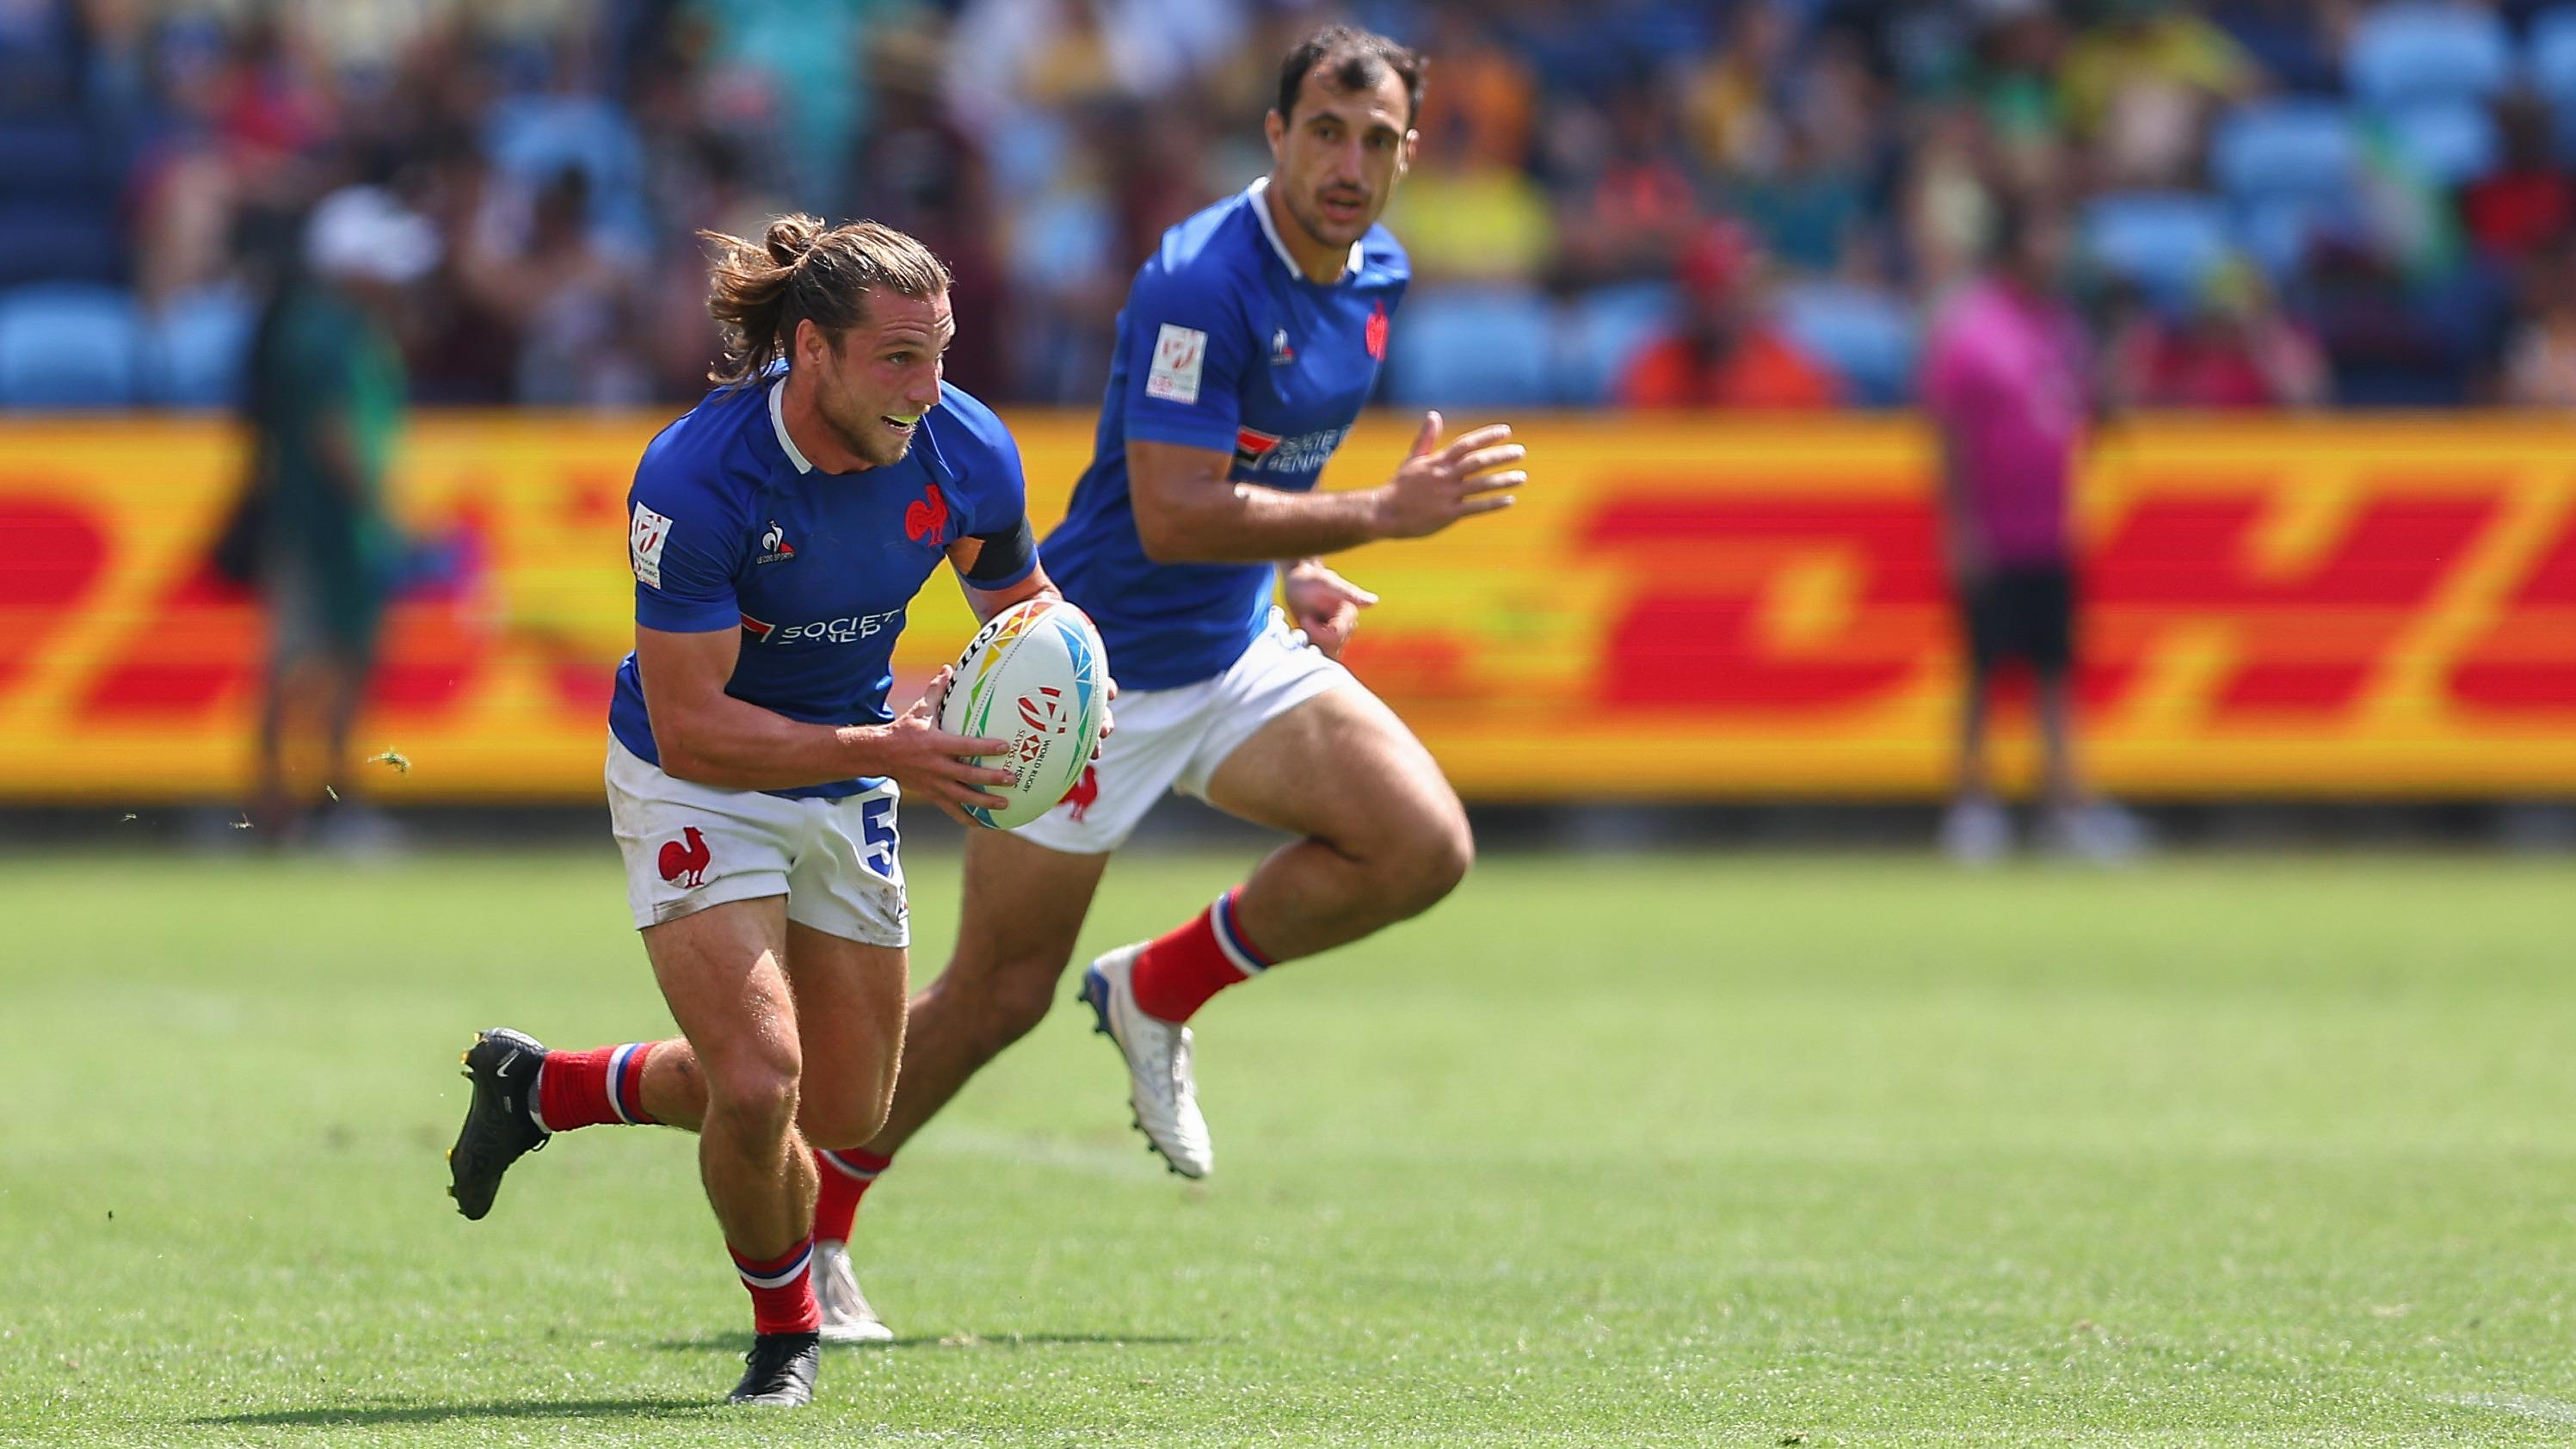 Rugby 7s: the French team beaten by Ireland and eliminated in the quarterfinals in Perth